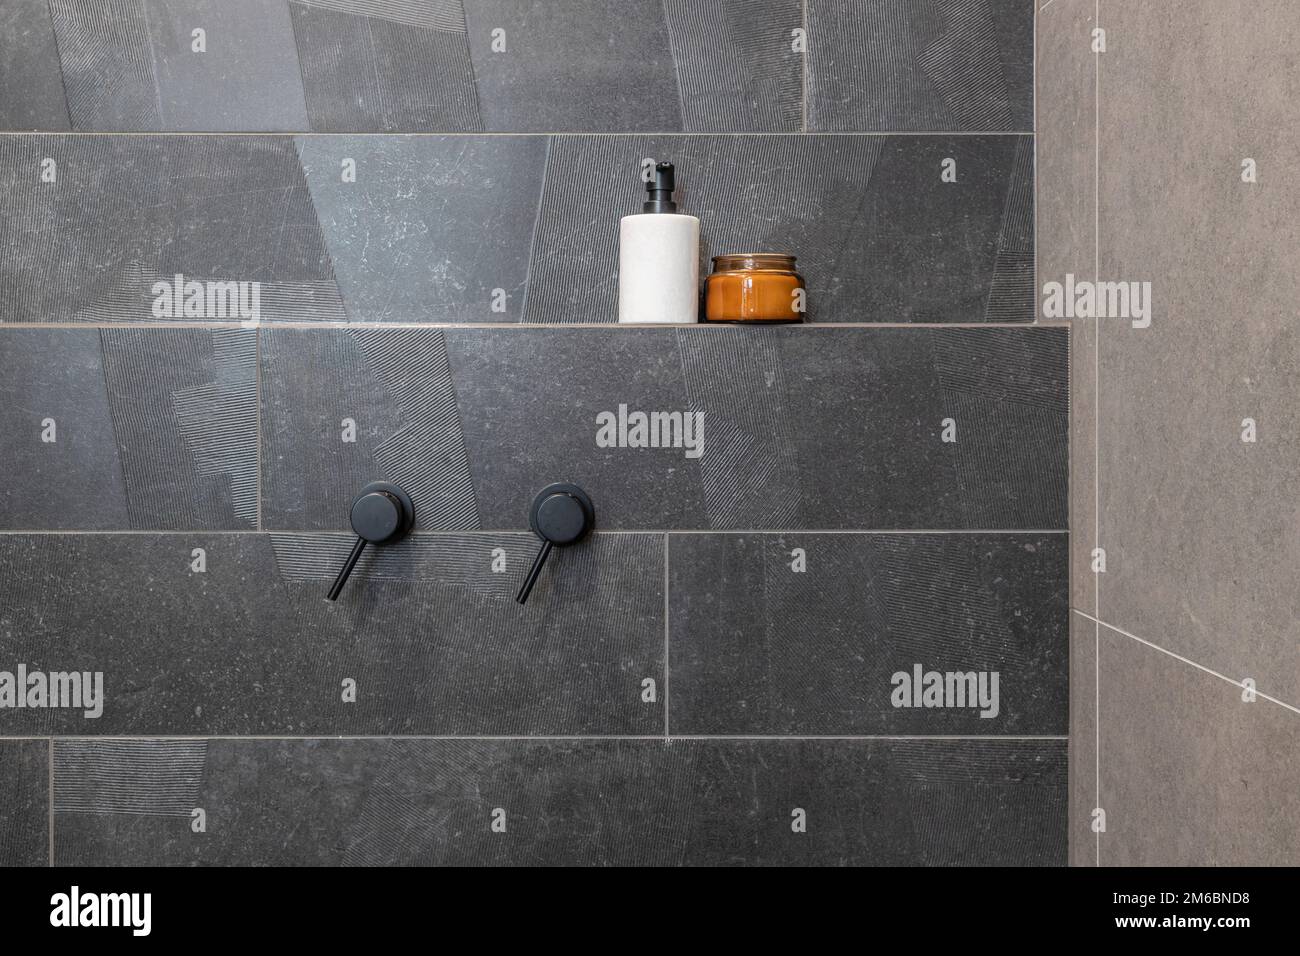 tiled bathroom shower area showing black hot and cold taps Stock Photo